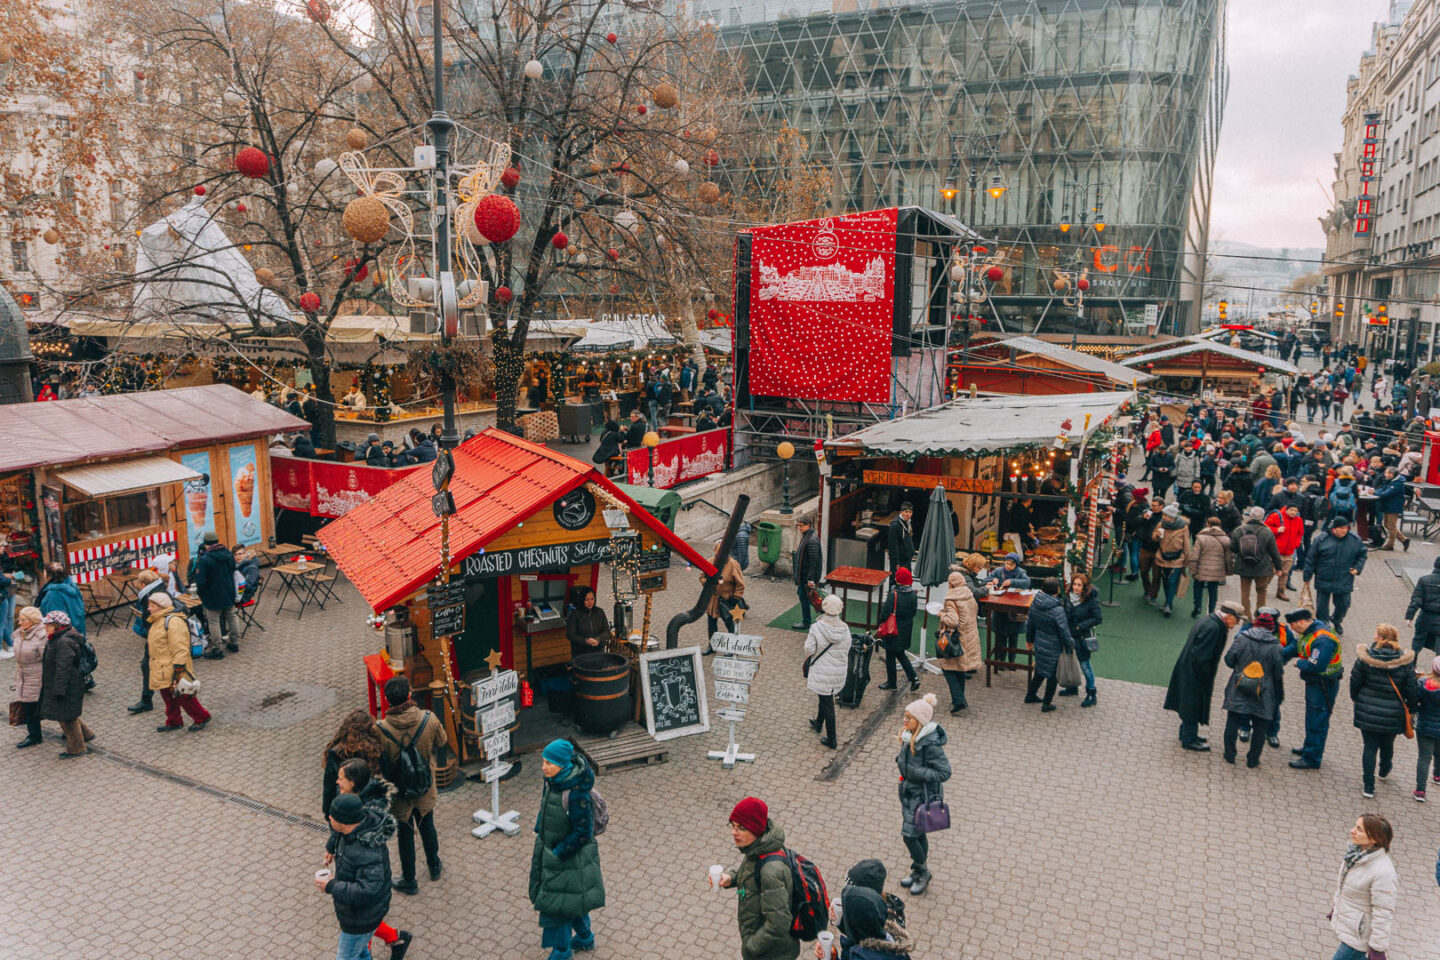 Looking down at the bustling Vörösmarty Square Christmas Market stalls and decorations.